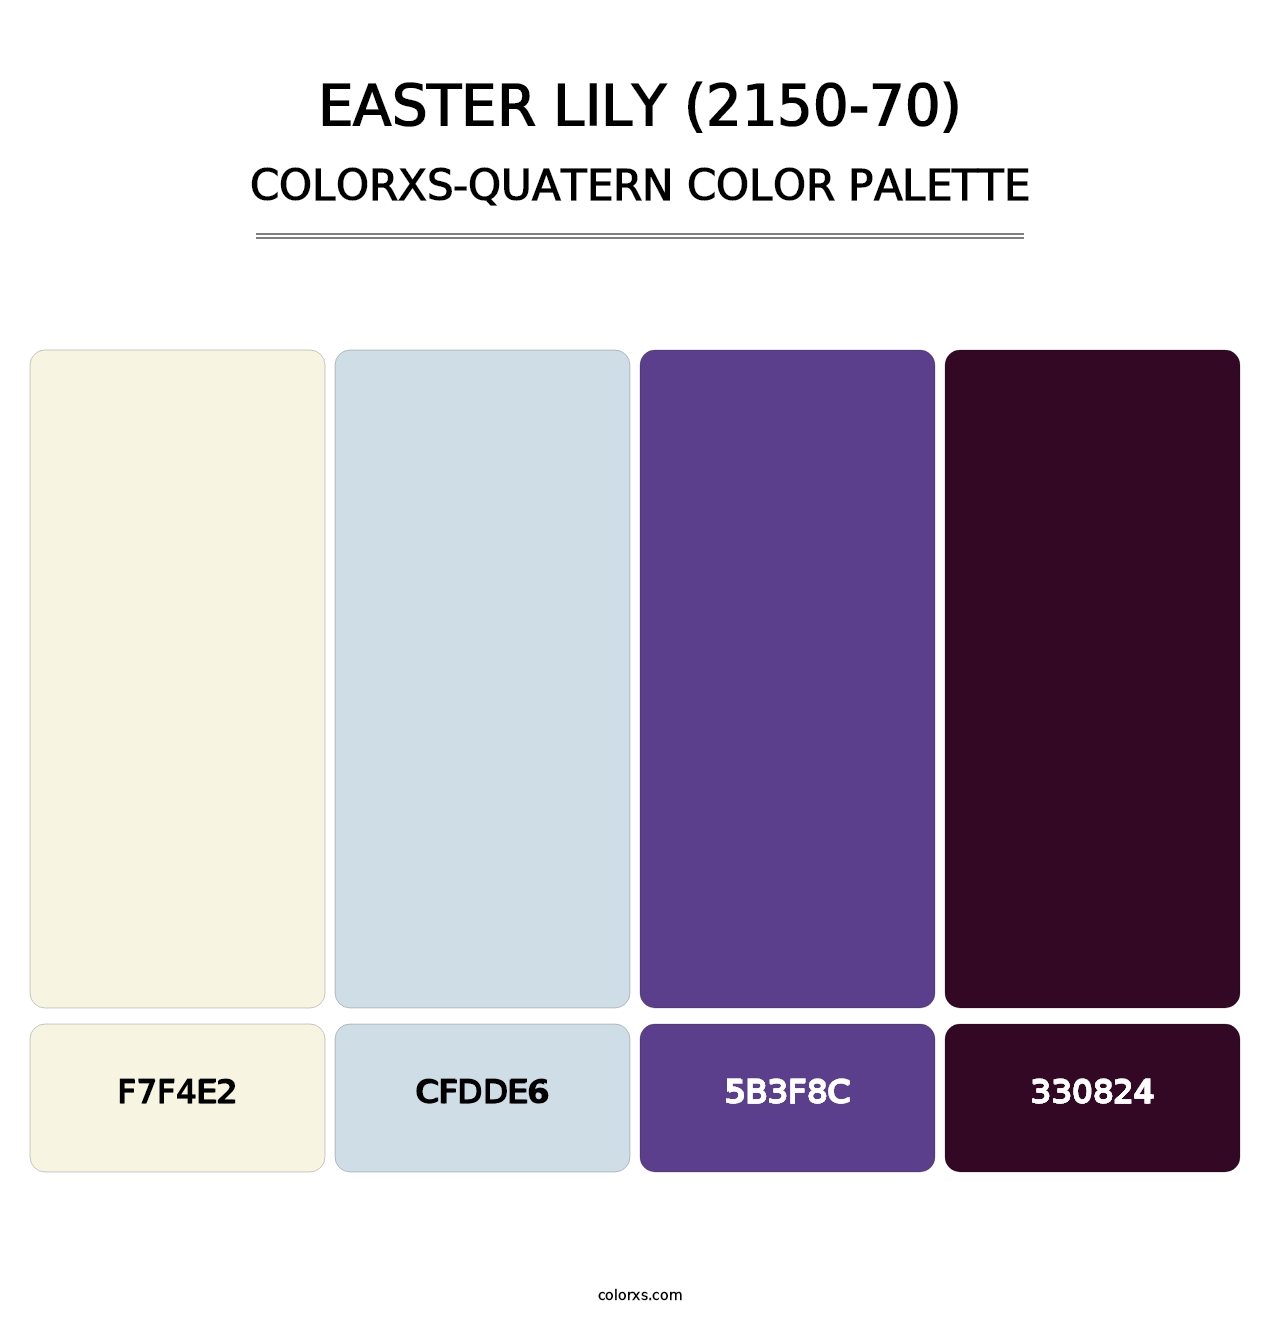 Easter Lily (2150-70) - Colorxs Quatern Palette